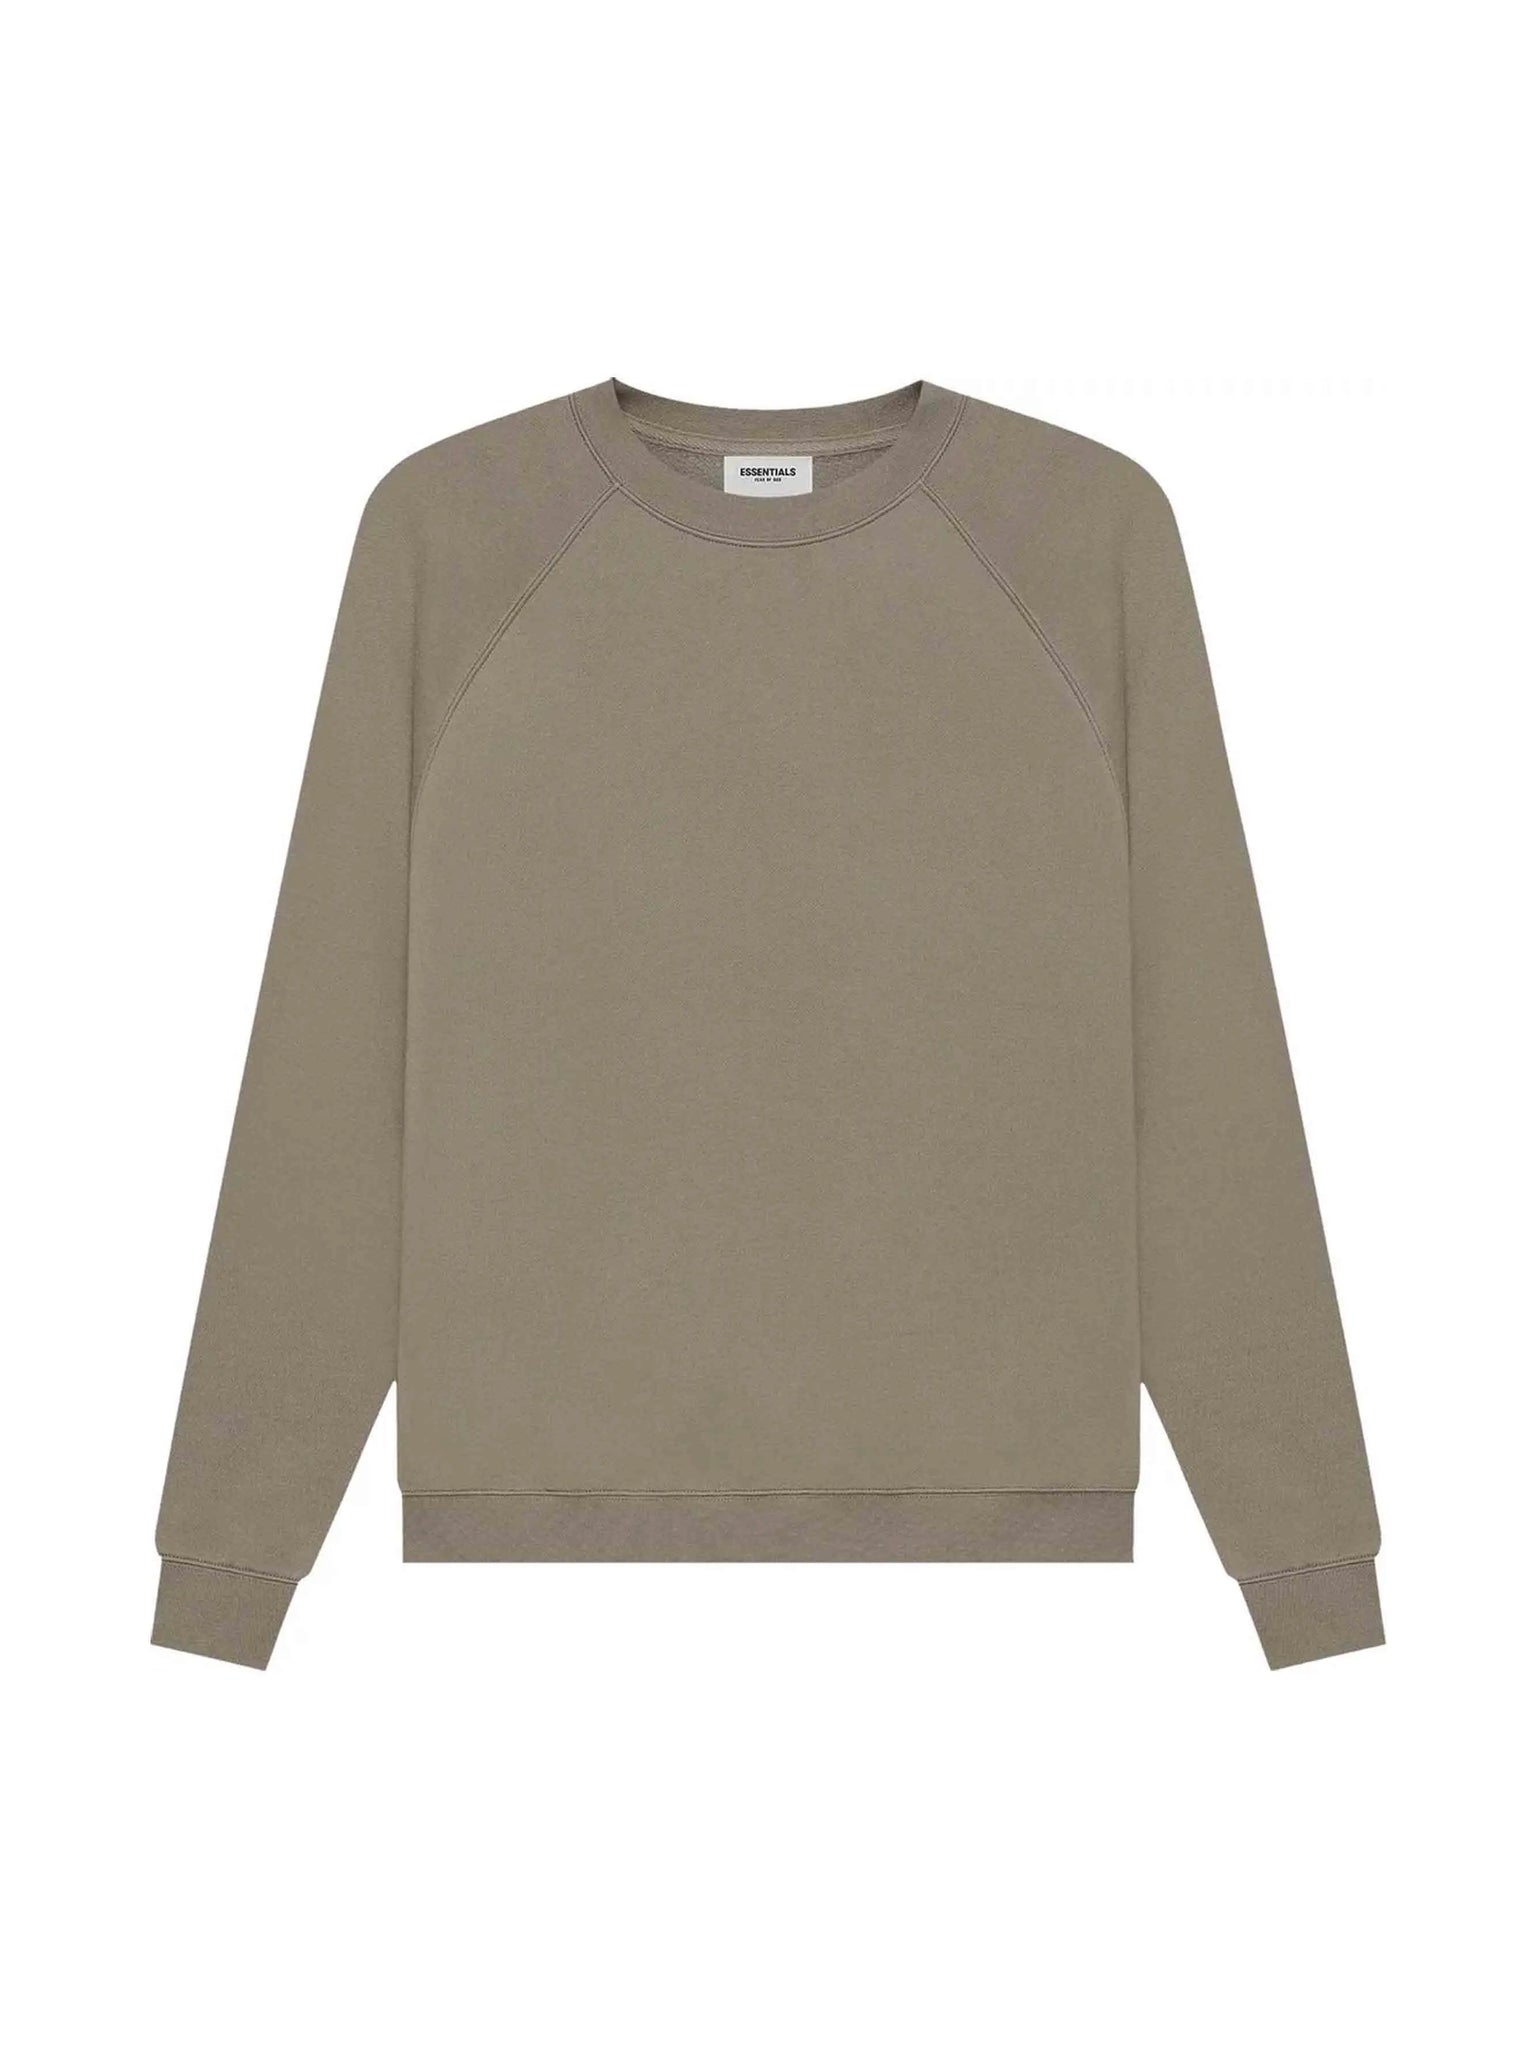 Fear of God Essentials Pull-Over Crewneck Taupe - Prior